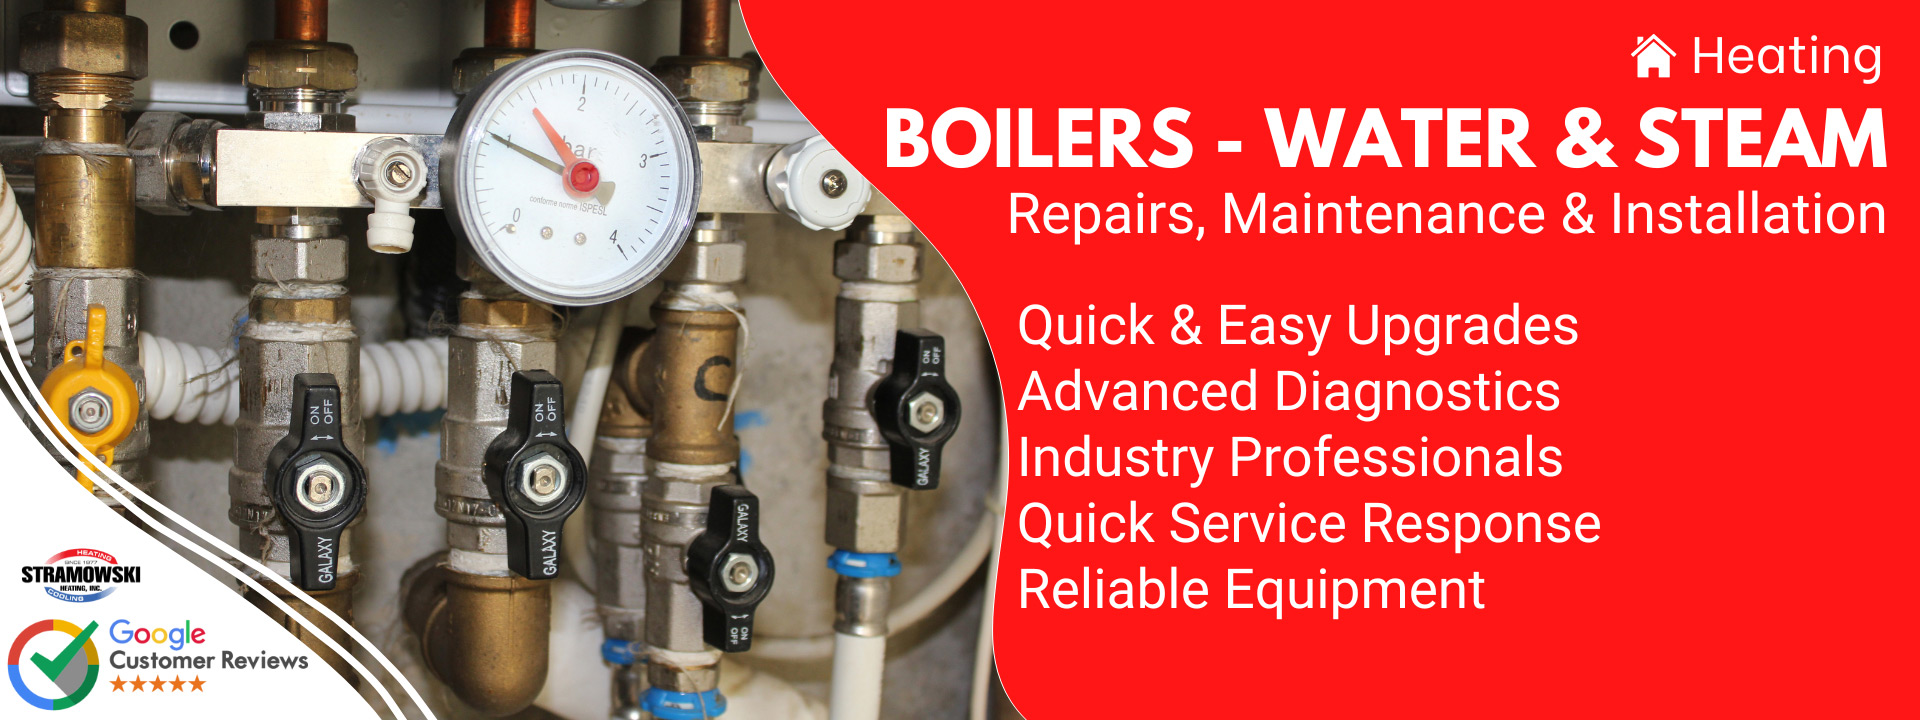 Boilers Heating System - Water / Steam